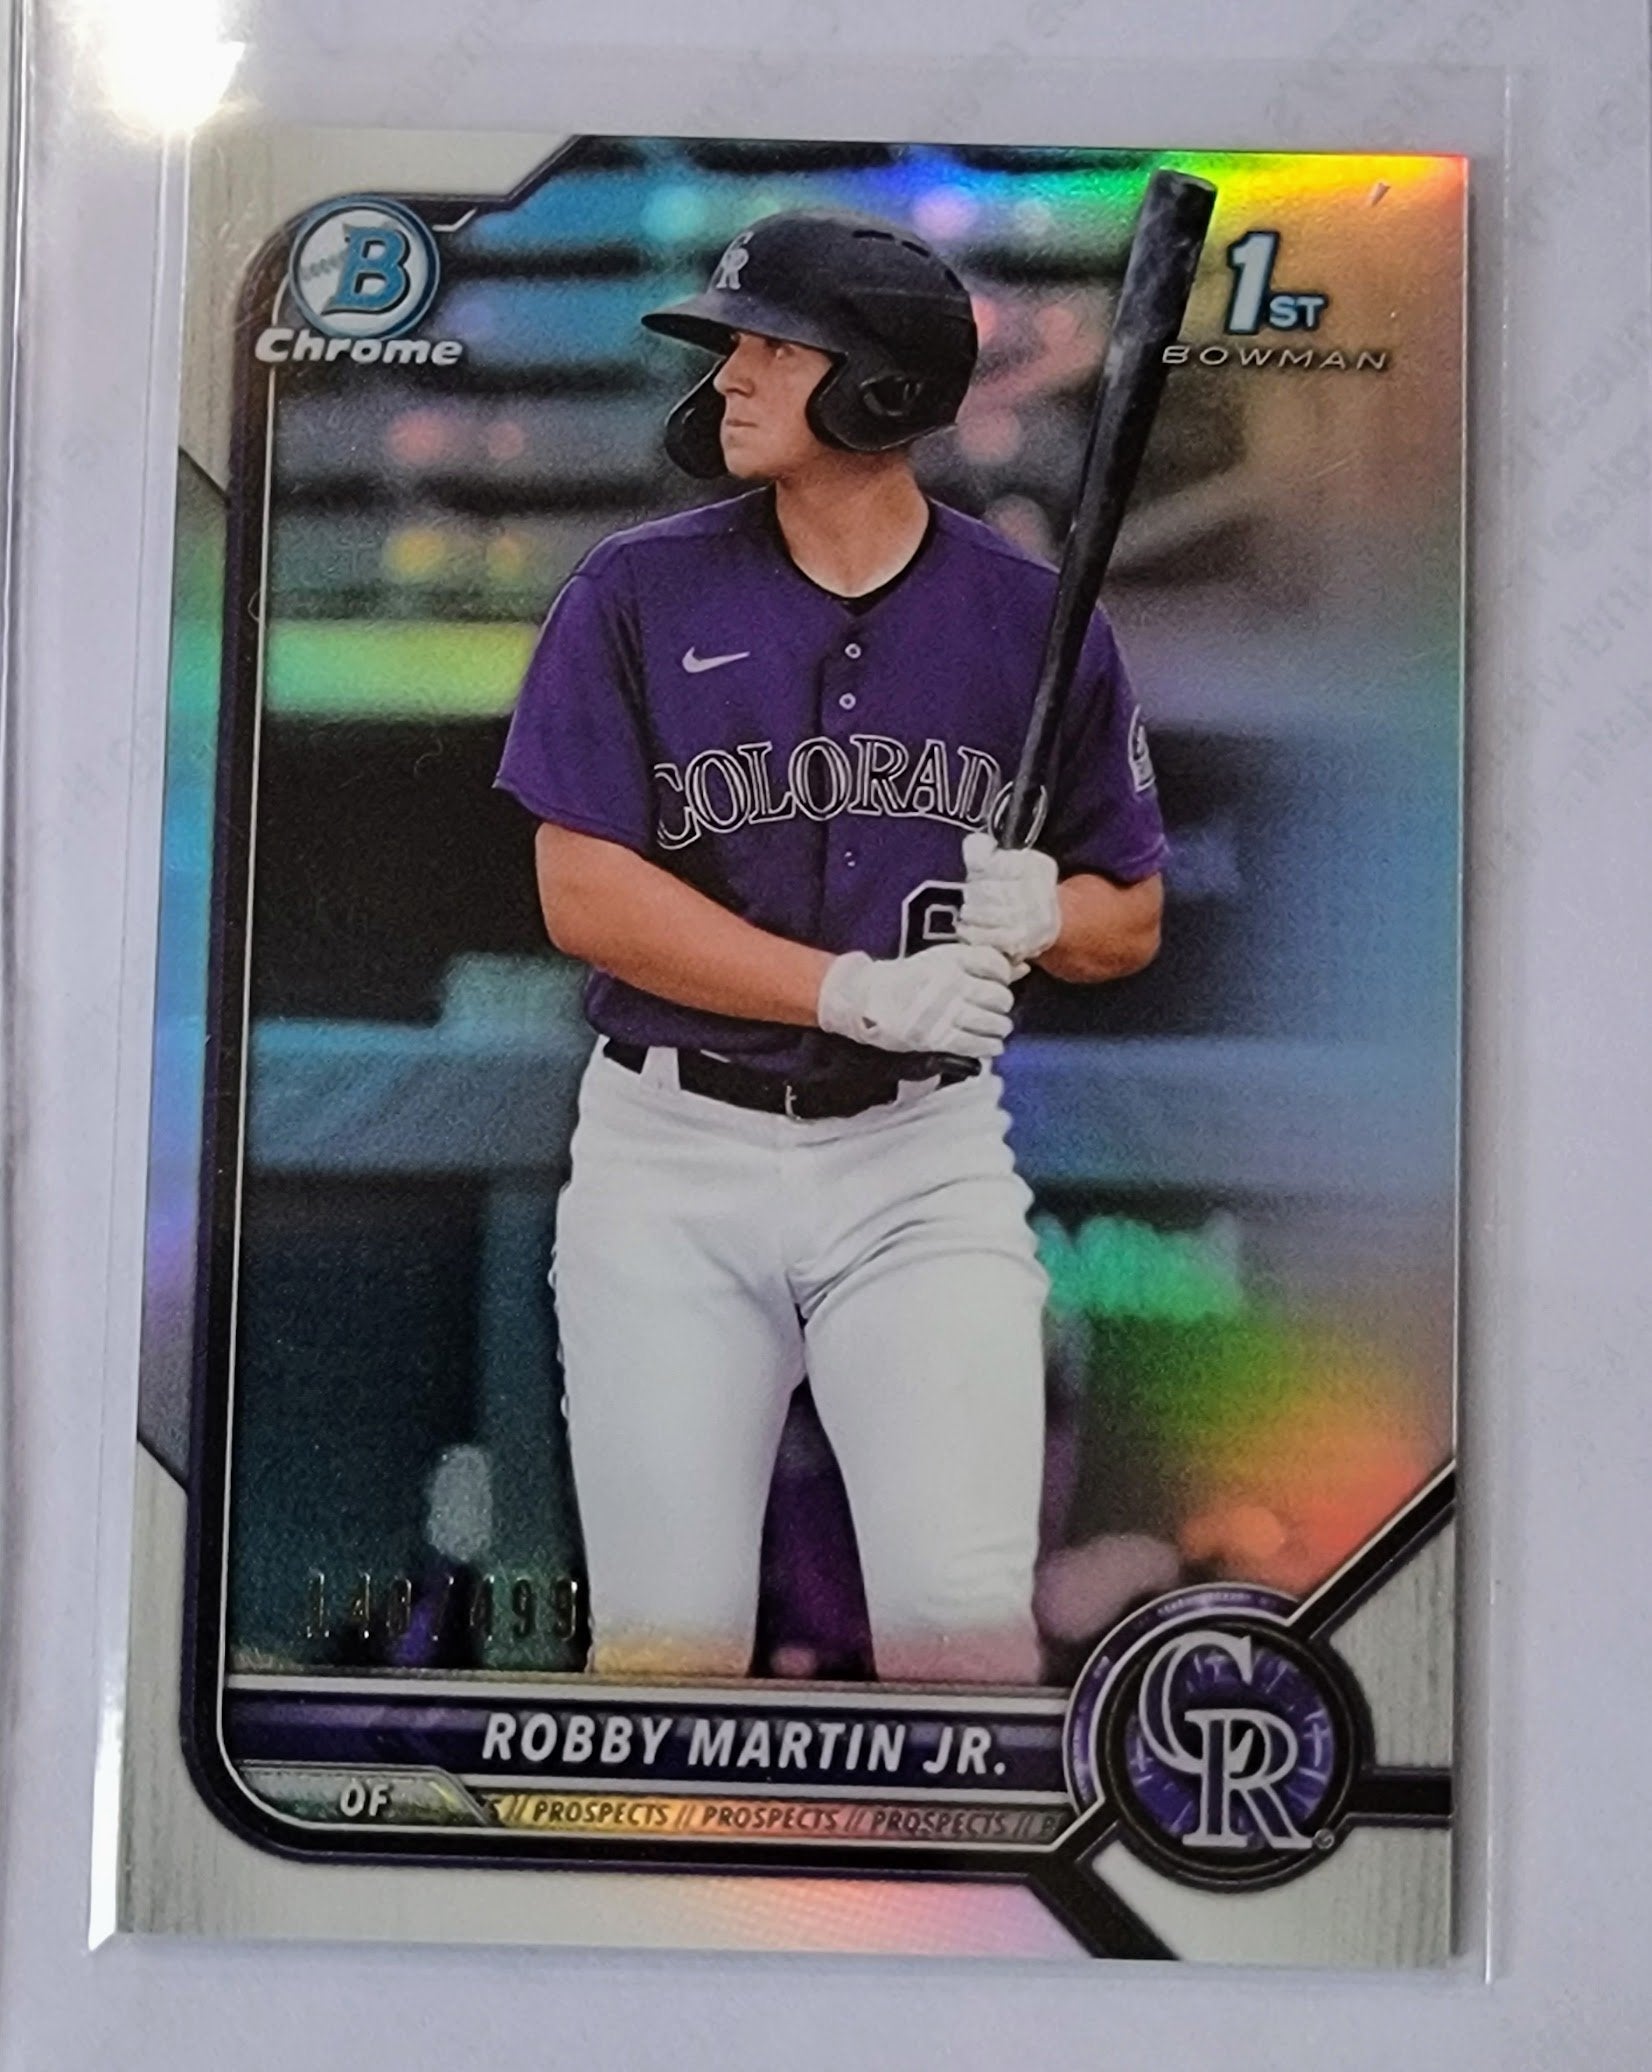 2022 Bowman Chrome Robby Martin Jr 1st on Bowman #'d/499 Refractor Baseball Trading Card GRB1 simple Xclusive Collectibles   